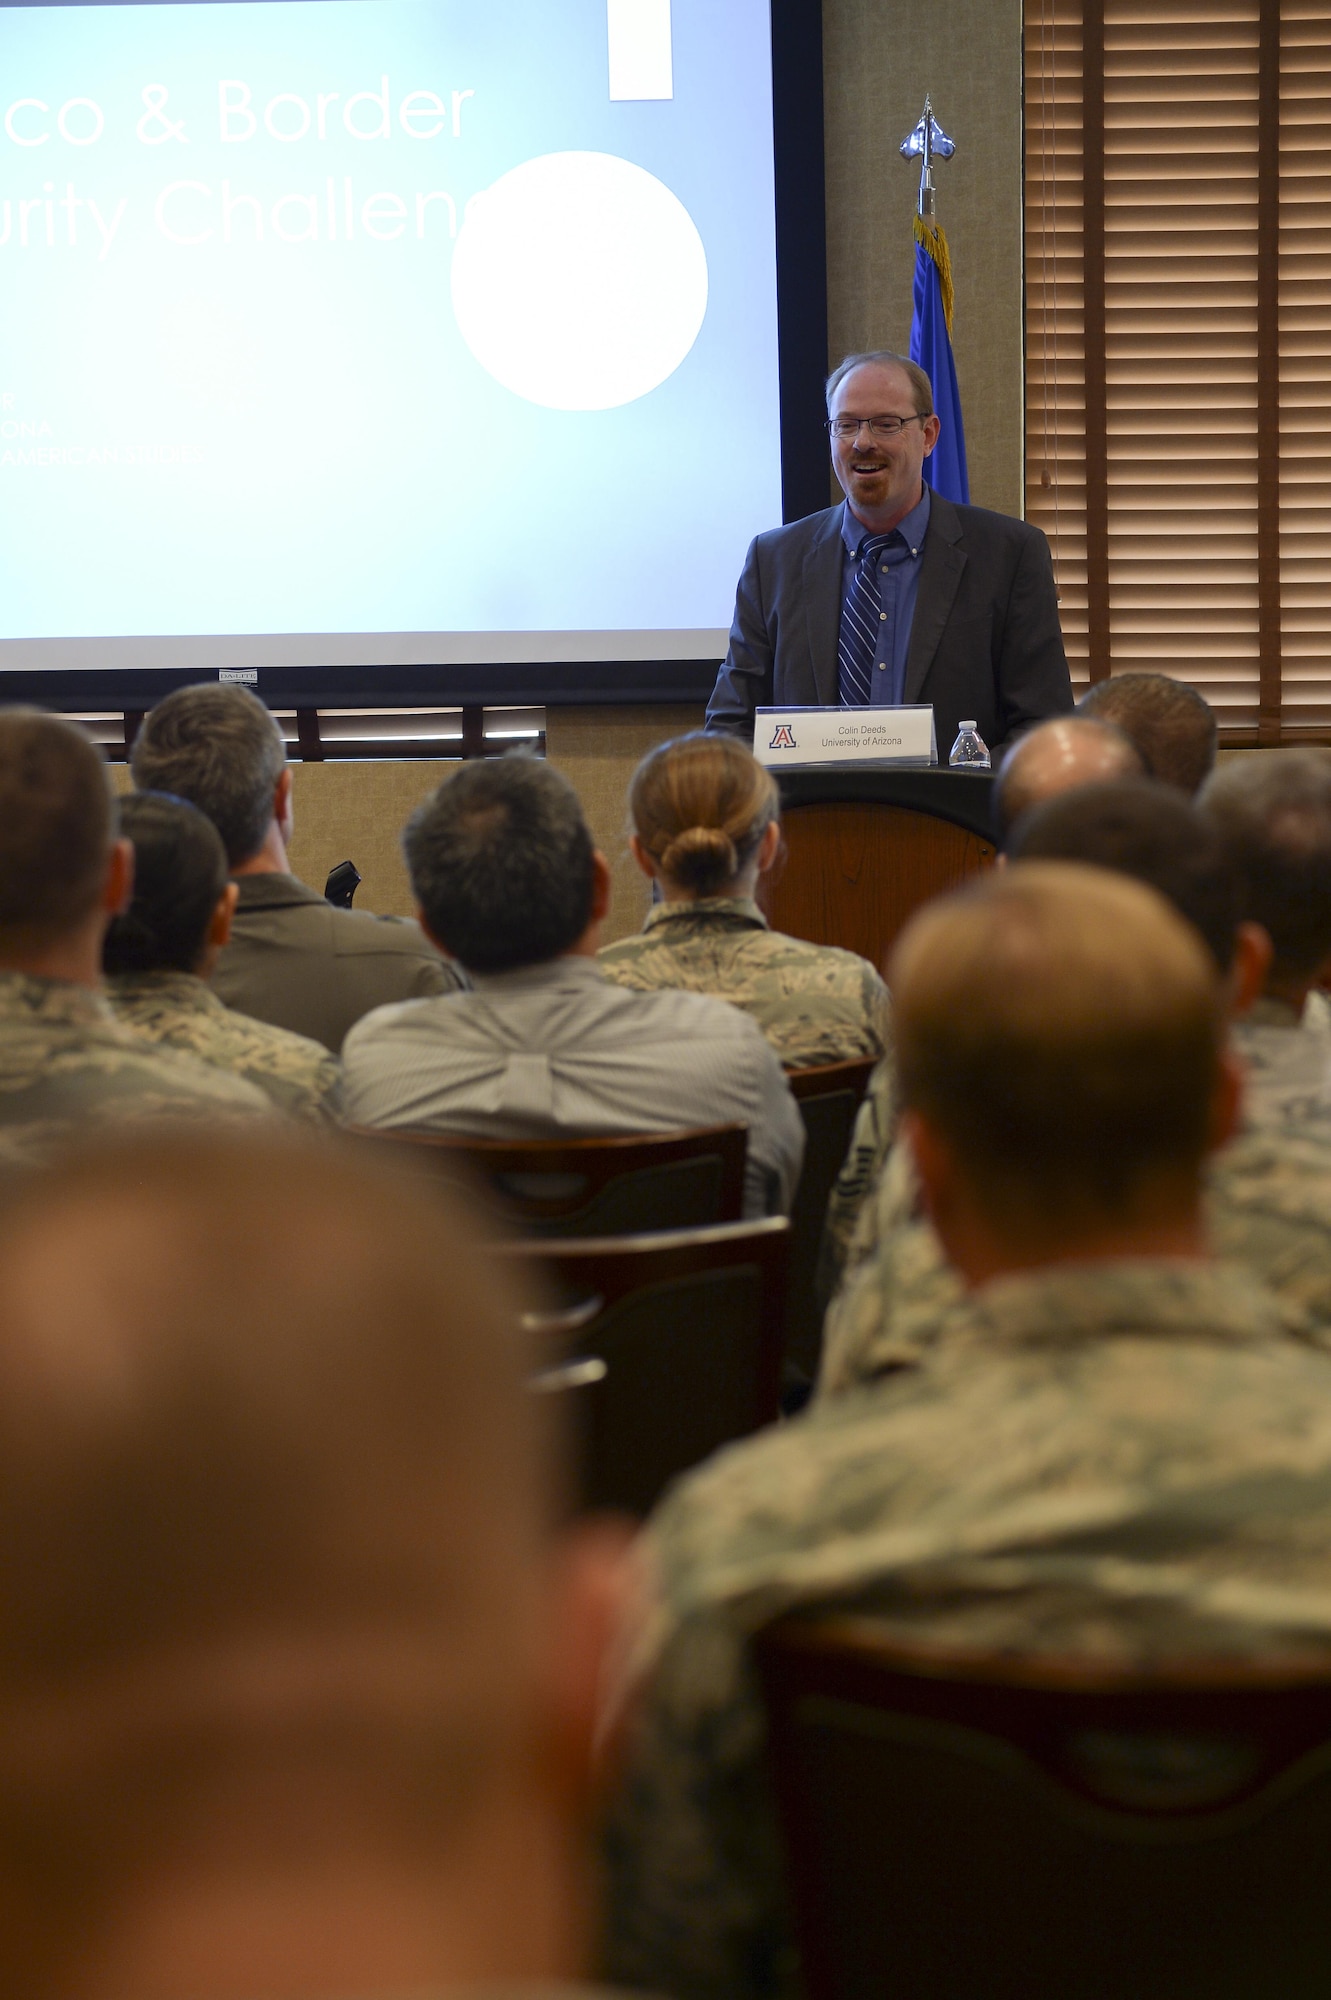 Colin Deeds, University of Arizona Latin American Studies Center assistant director, lectures during a speaker series event at Davis-Monthan Air Force Base, Ariz., June 19, 2017, for the 12th Air Force (Air Forces Southern) Academic Outreach Program with the University of Arizona. Following the event, the University of Arizona officials were given a tour of the 309th Aerospace Maintenance and Regeneration Group, the largest aircraft storage and preservation facility in the world. (U.S. Air Force photo by Staff Sgt. Angela Ruiz)